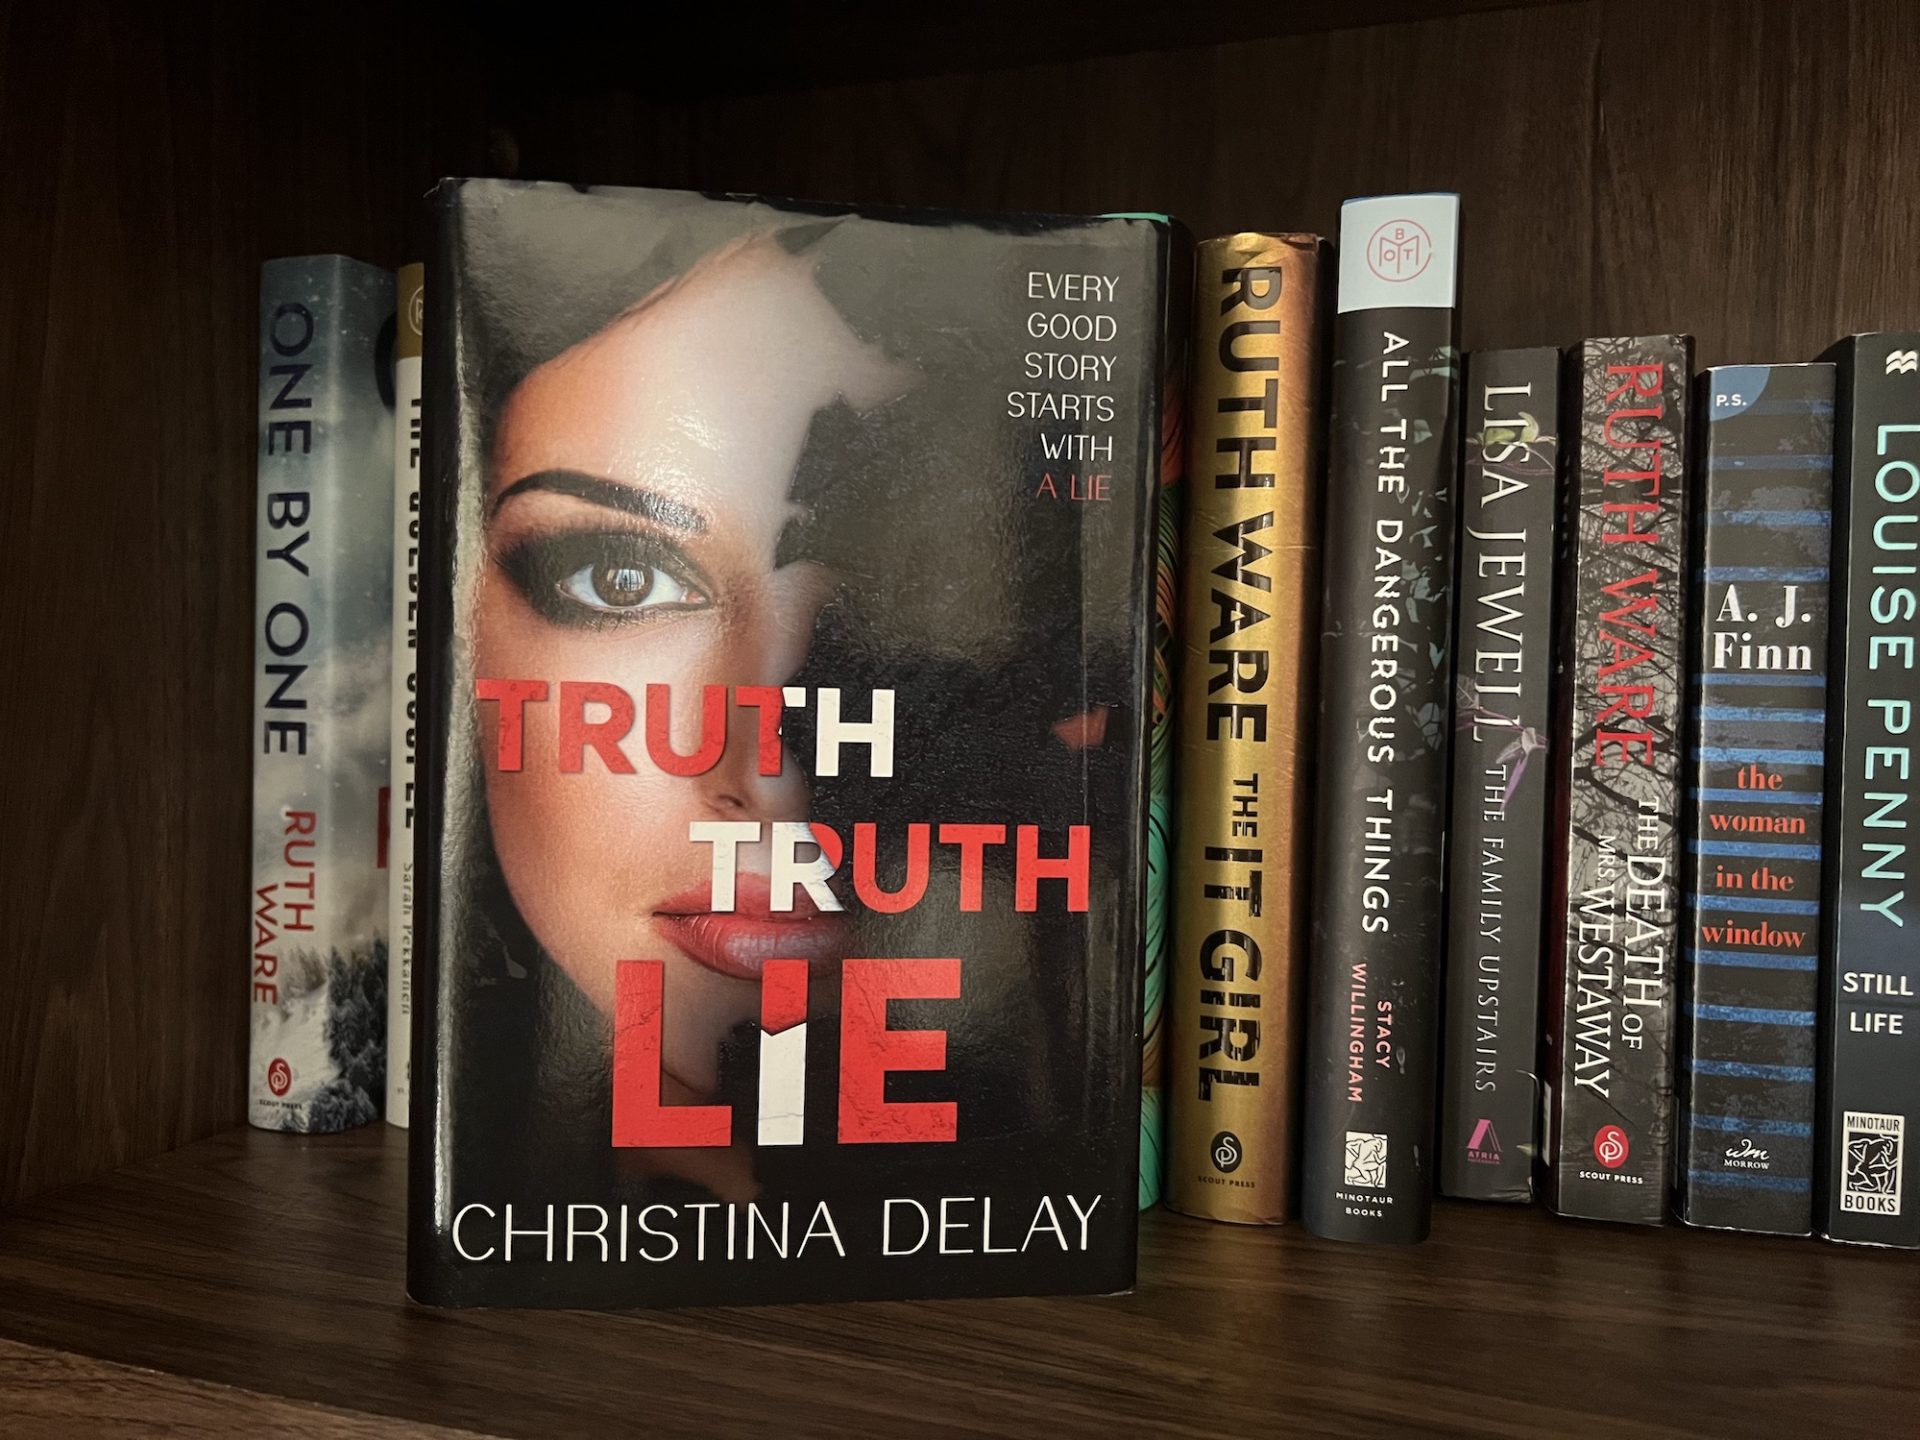 Christina Delay's Truth Truth Lie sits on on a bookshelf with other thrillers behind it. The cover shows a beautiful woman's face half covered with the title large in bold red letters